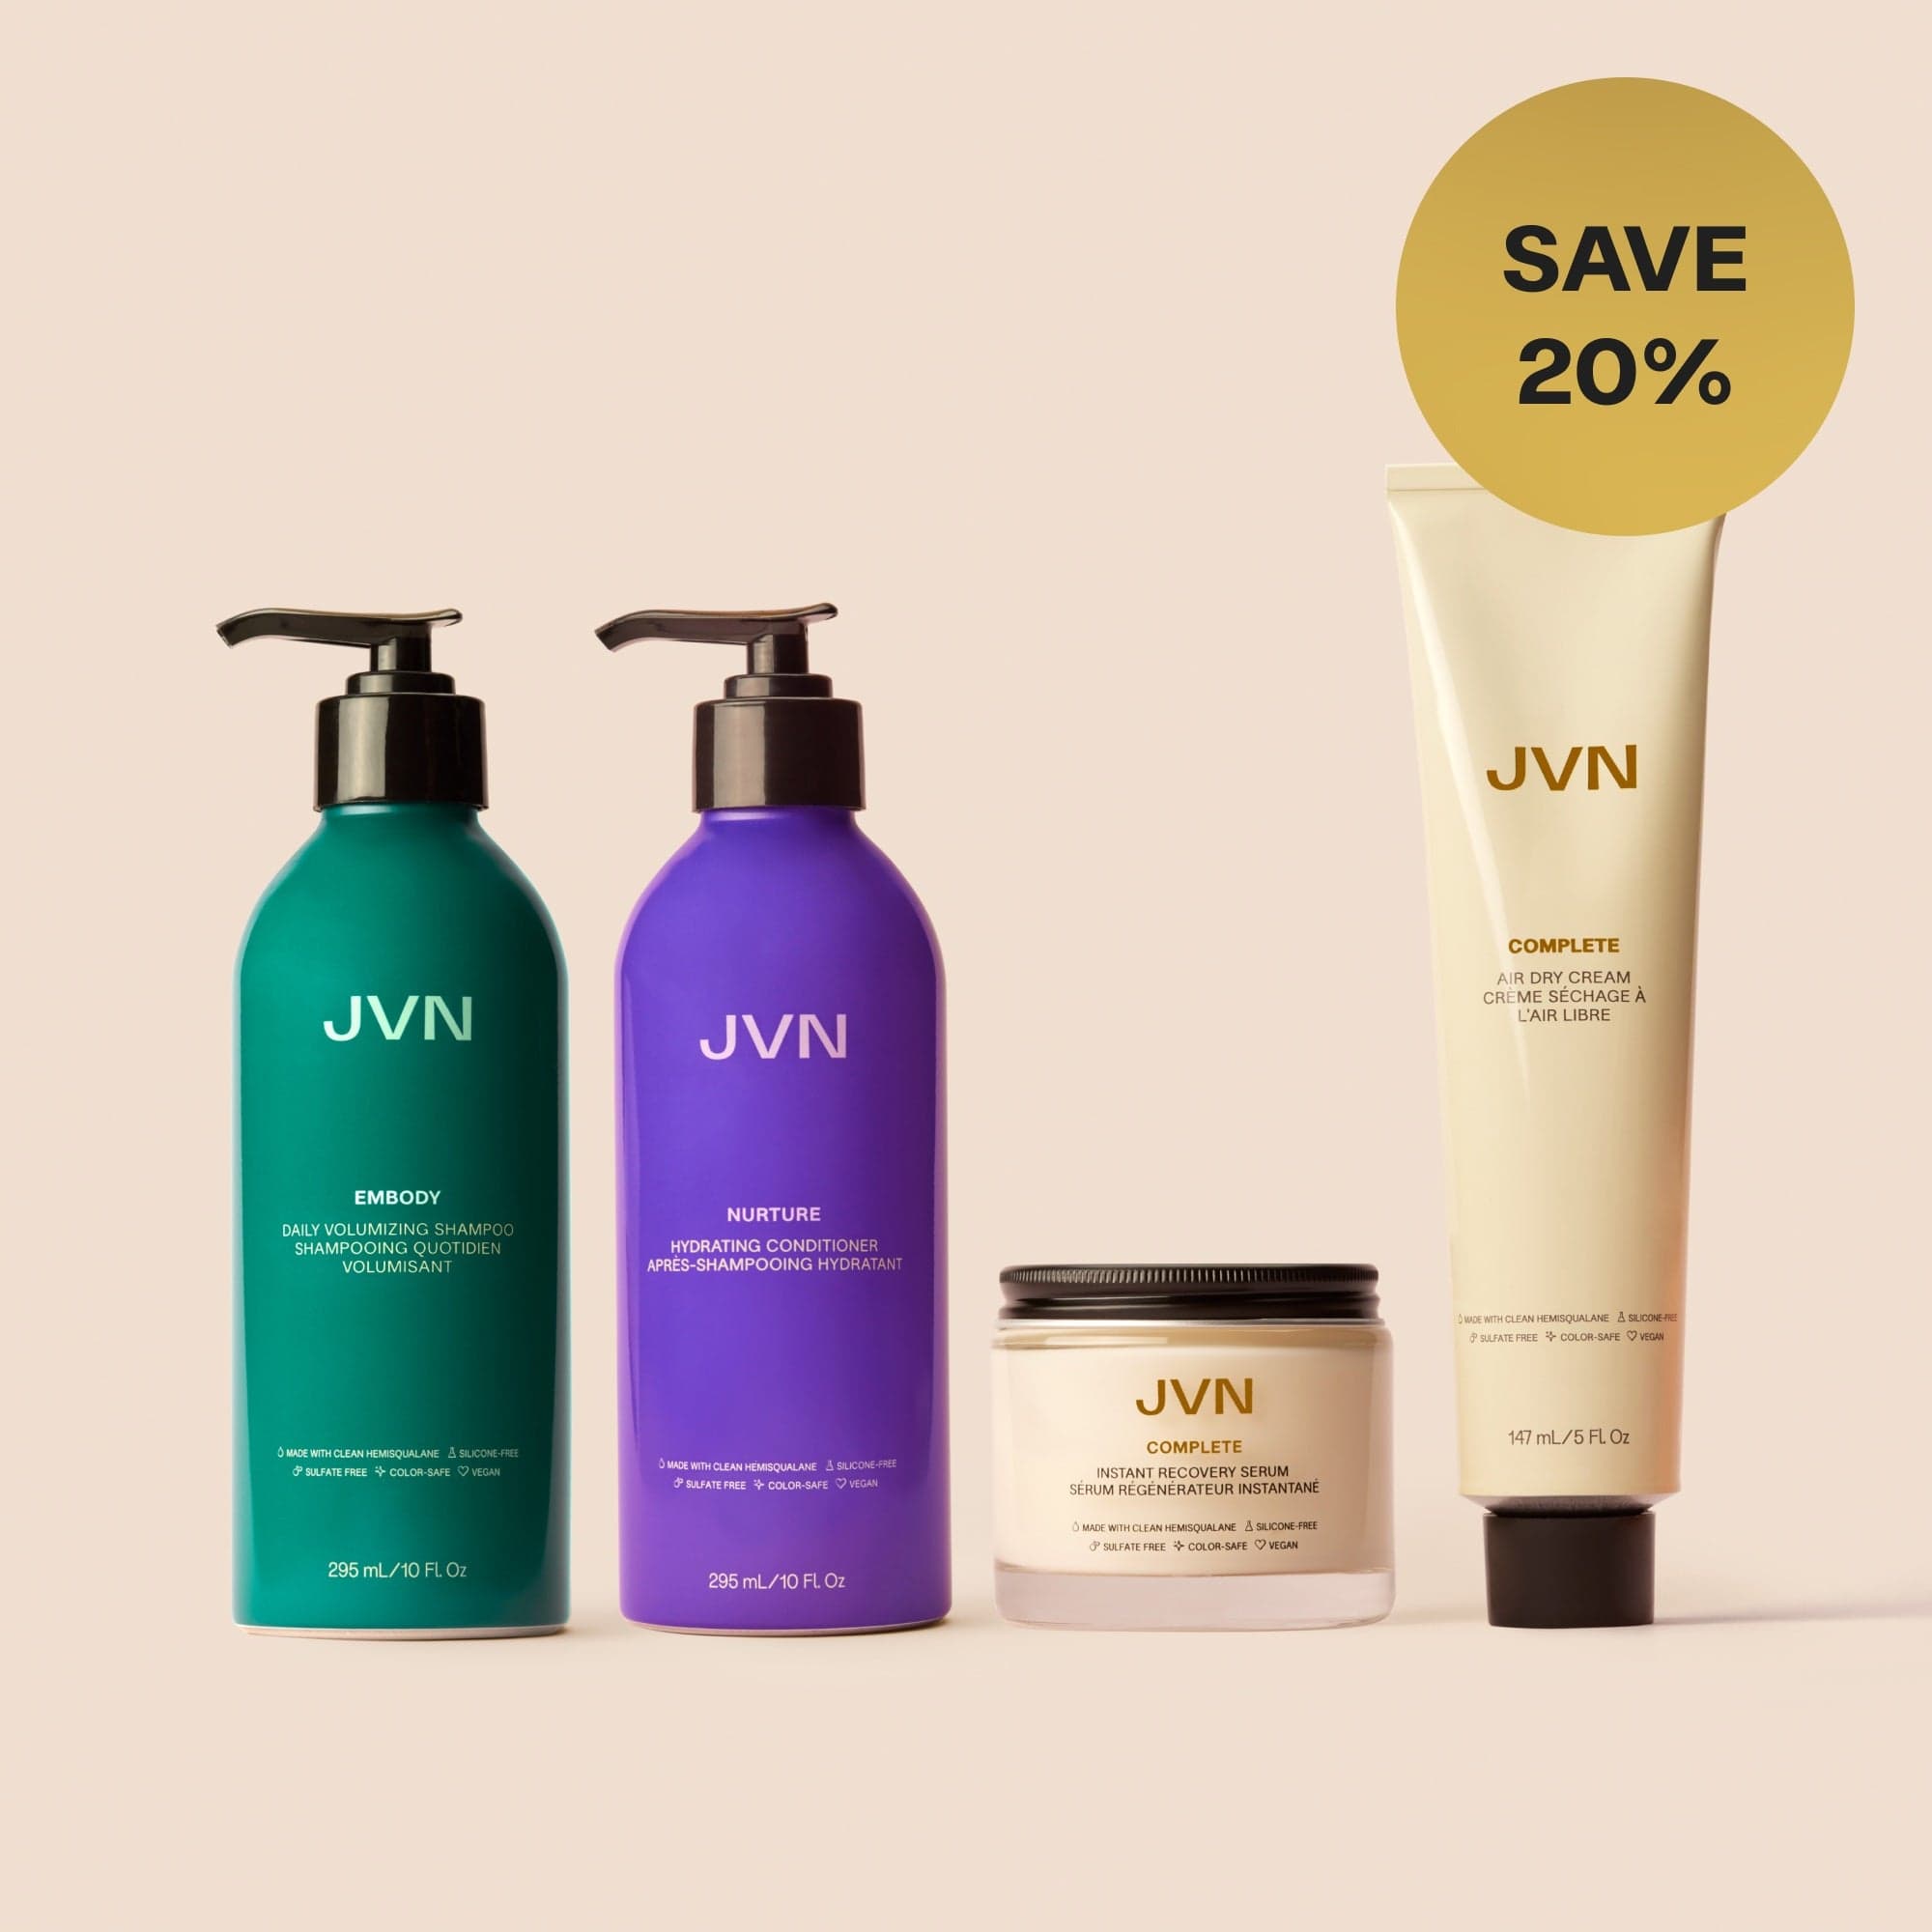 JVN sets product Effortless Curls & Waves Routine Effortless Waves Routine | Products For Wavy Hair | JVN sulfate-free silicone-free sustainable